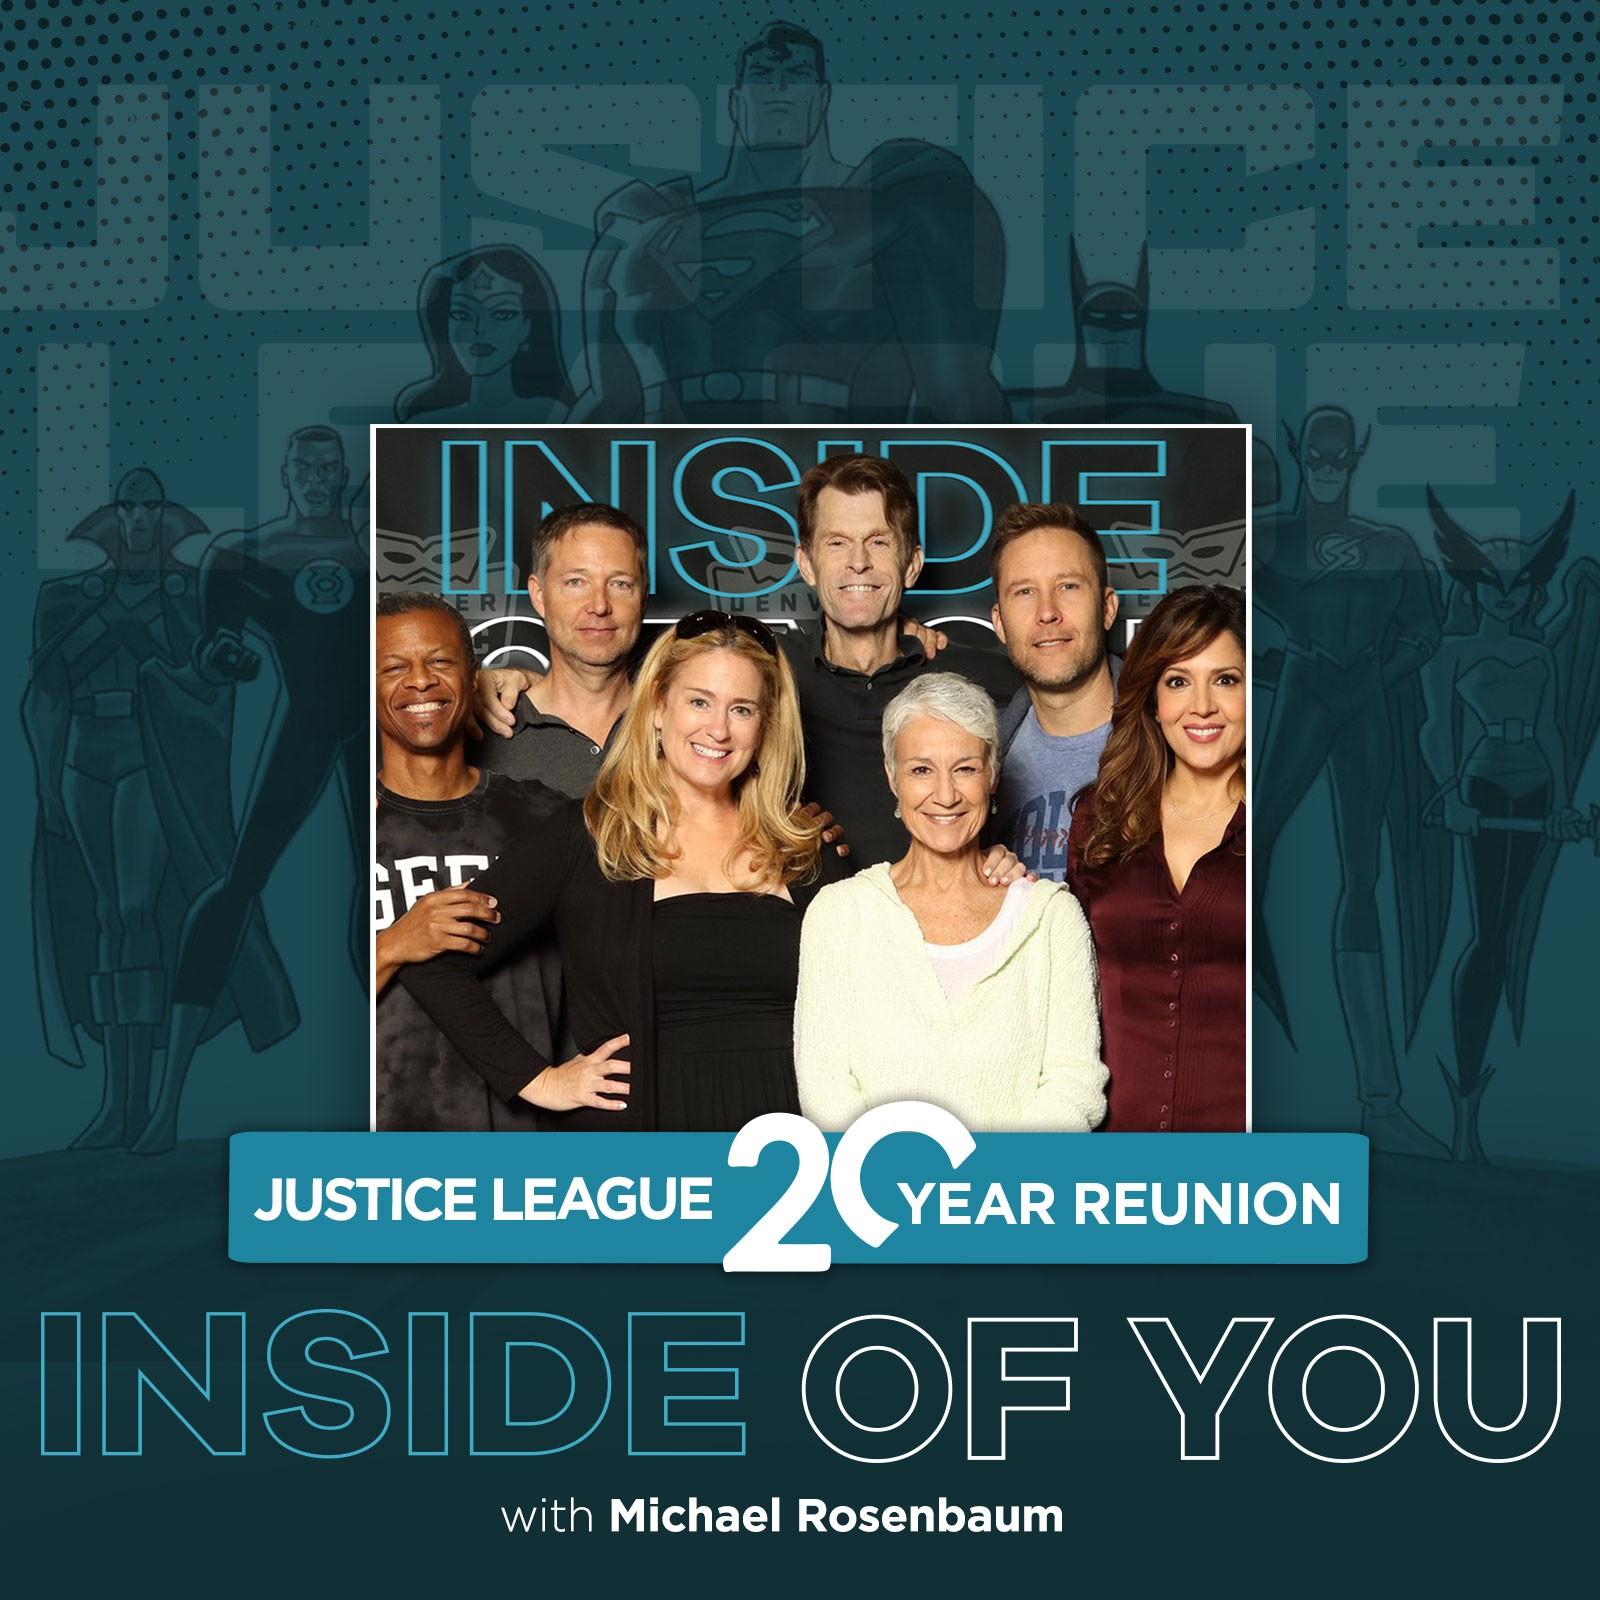 THE CAST OF JUSTICE LEAGUE REUNITES ON MICHAEL ROSENBAUM’S INSIDE OF YOU PODCAST